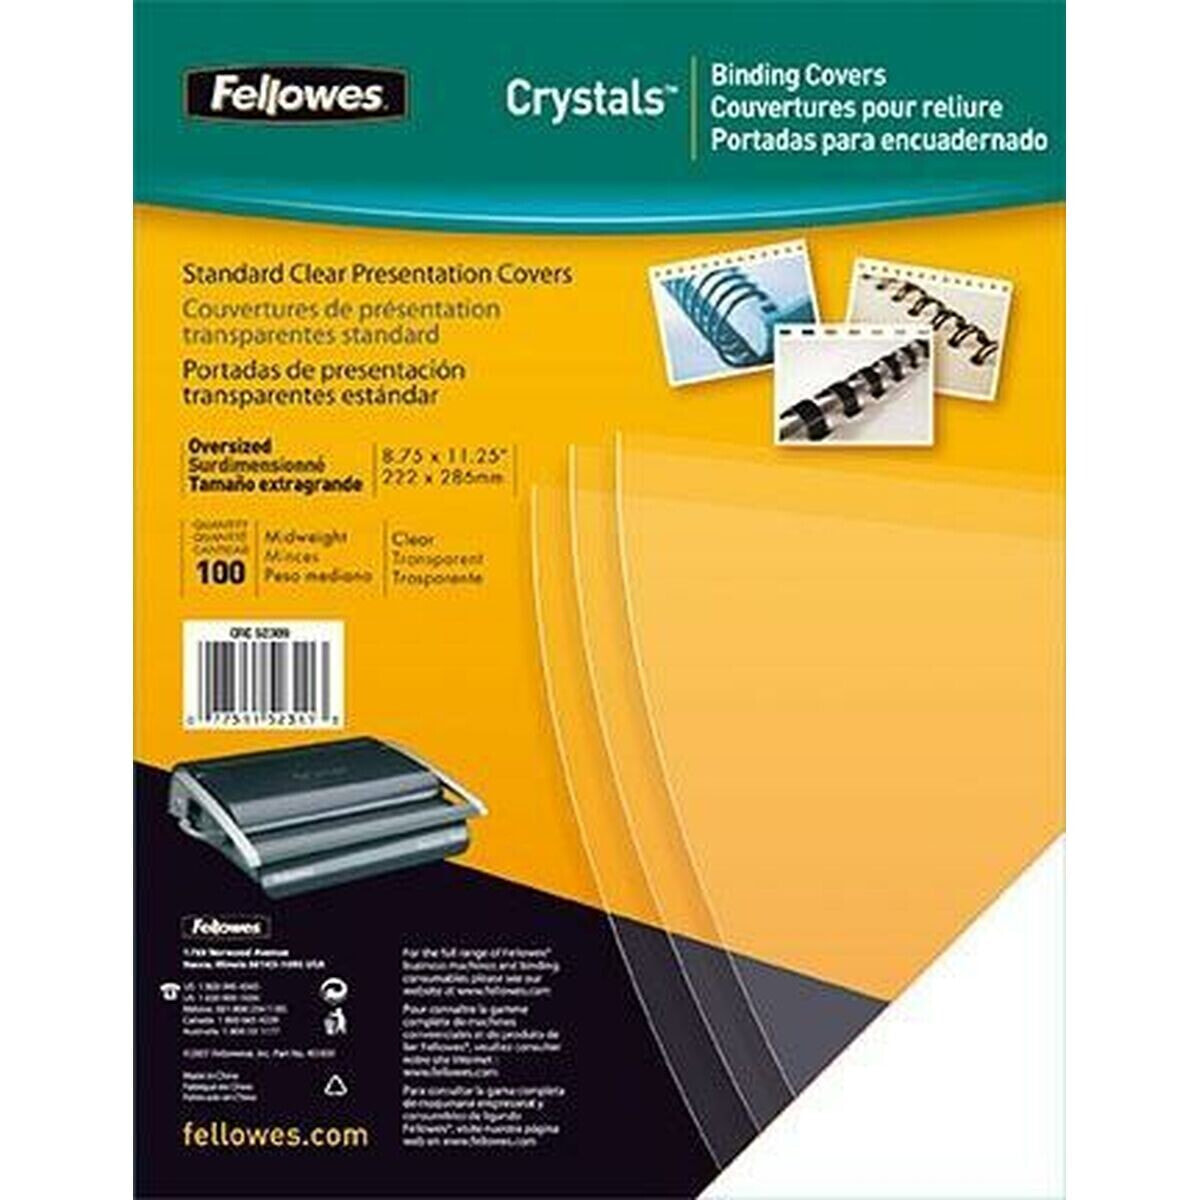 Binding covers Fellowes Crystals Transparent PVC A4 (100 Units)